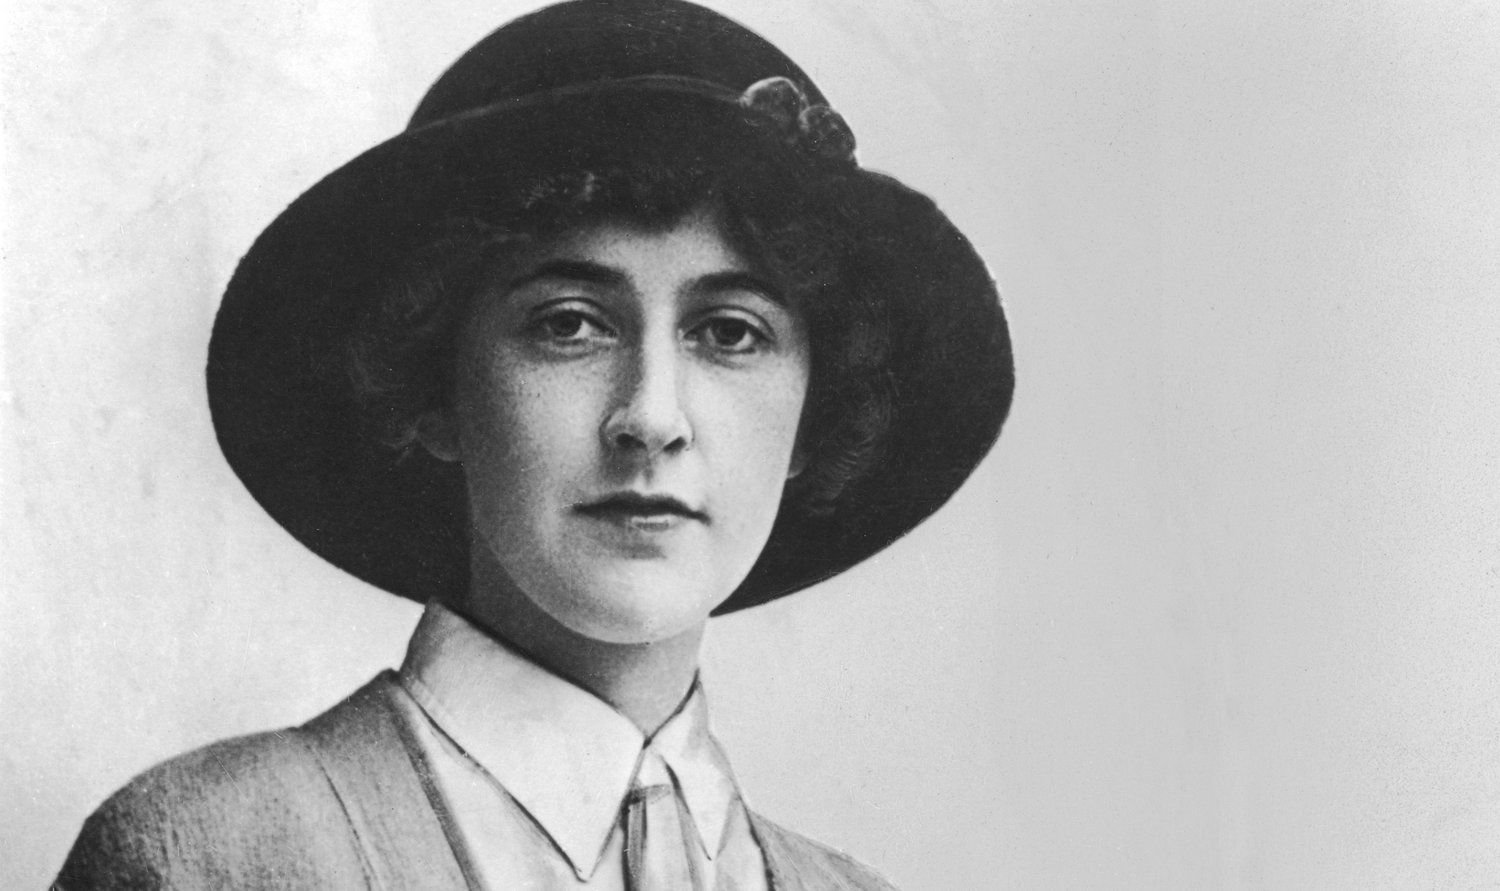 Agatha Christie around the time of her disappearance in 1926.